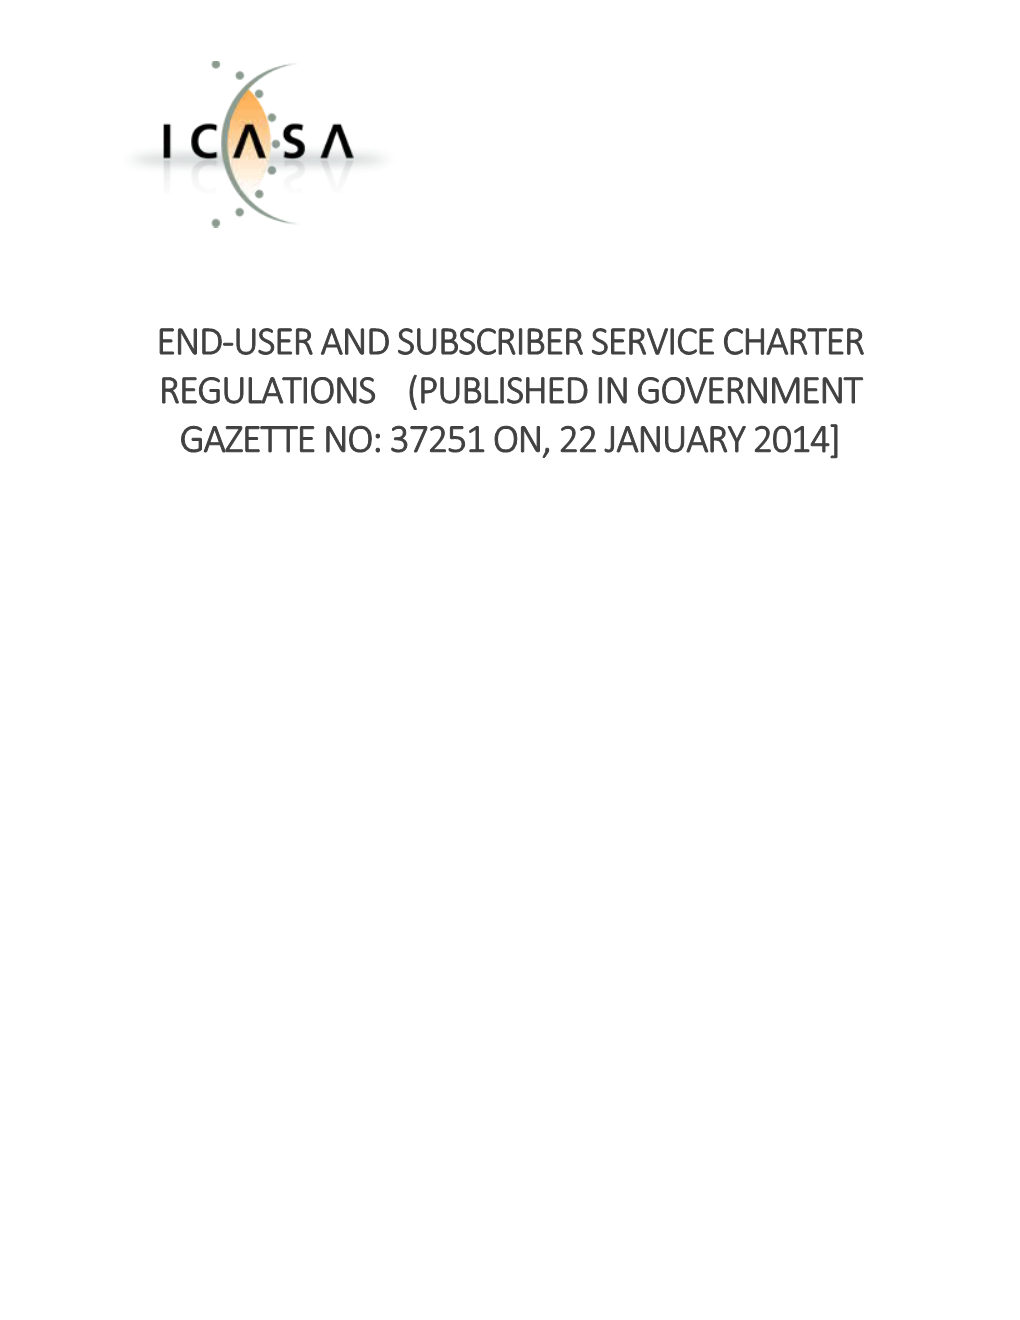 End-User and Subscriber Service Charter Regulations (Published in Government Gazette No